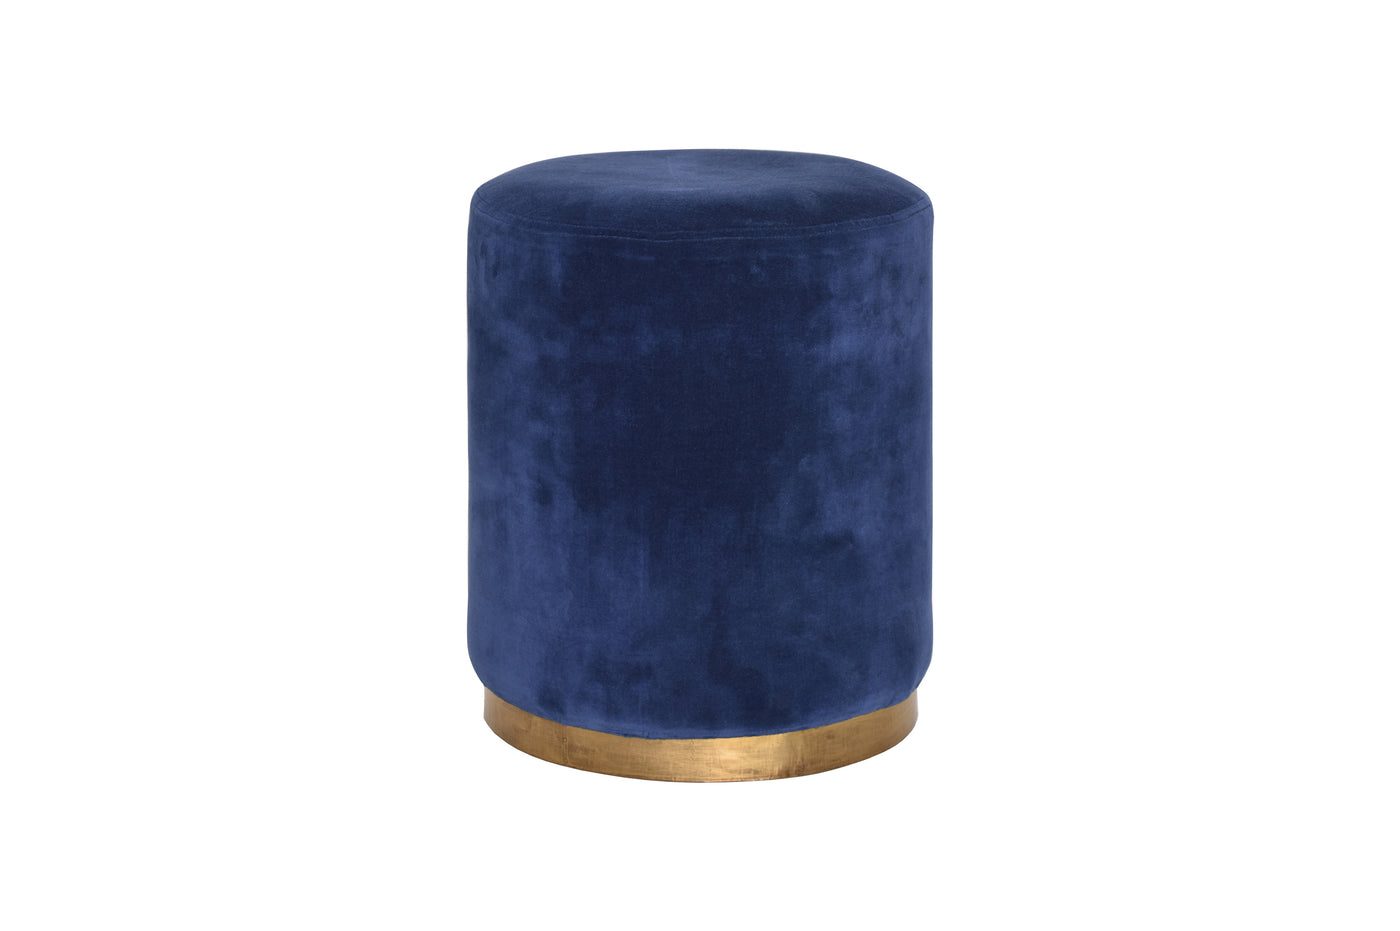 Templar Blue Ottoman with Brass Base Hoya Casa Hoyacasa.ca couch sofa bed 4 seater sectional table kitchen table love seat sofa bed matress Toronto Canada manufactures home decoration frames indoor Ottoman sale